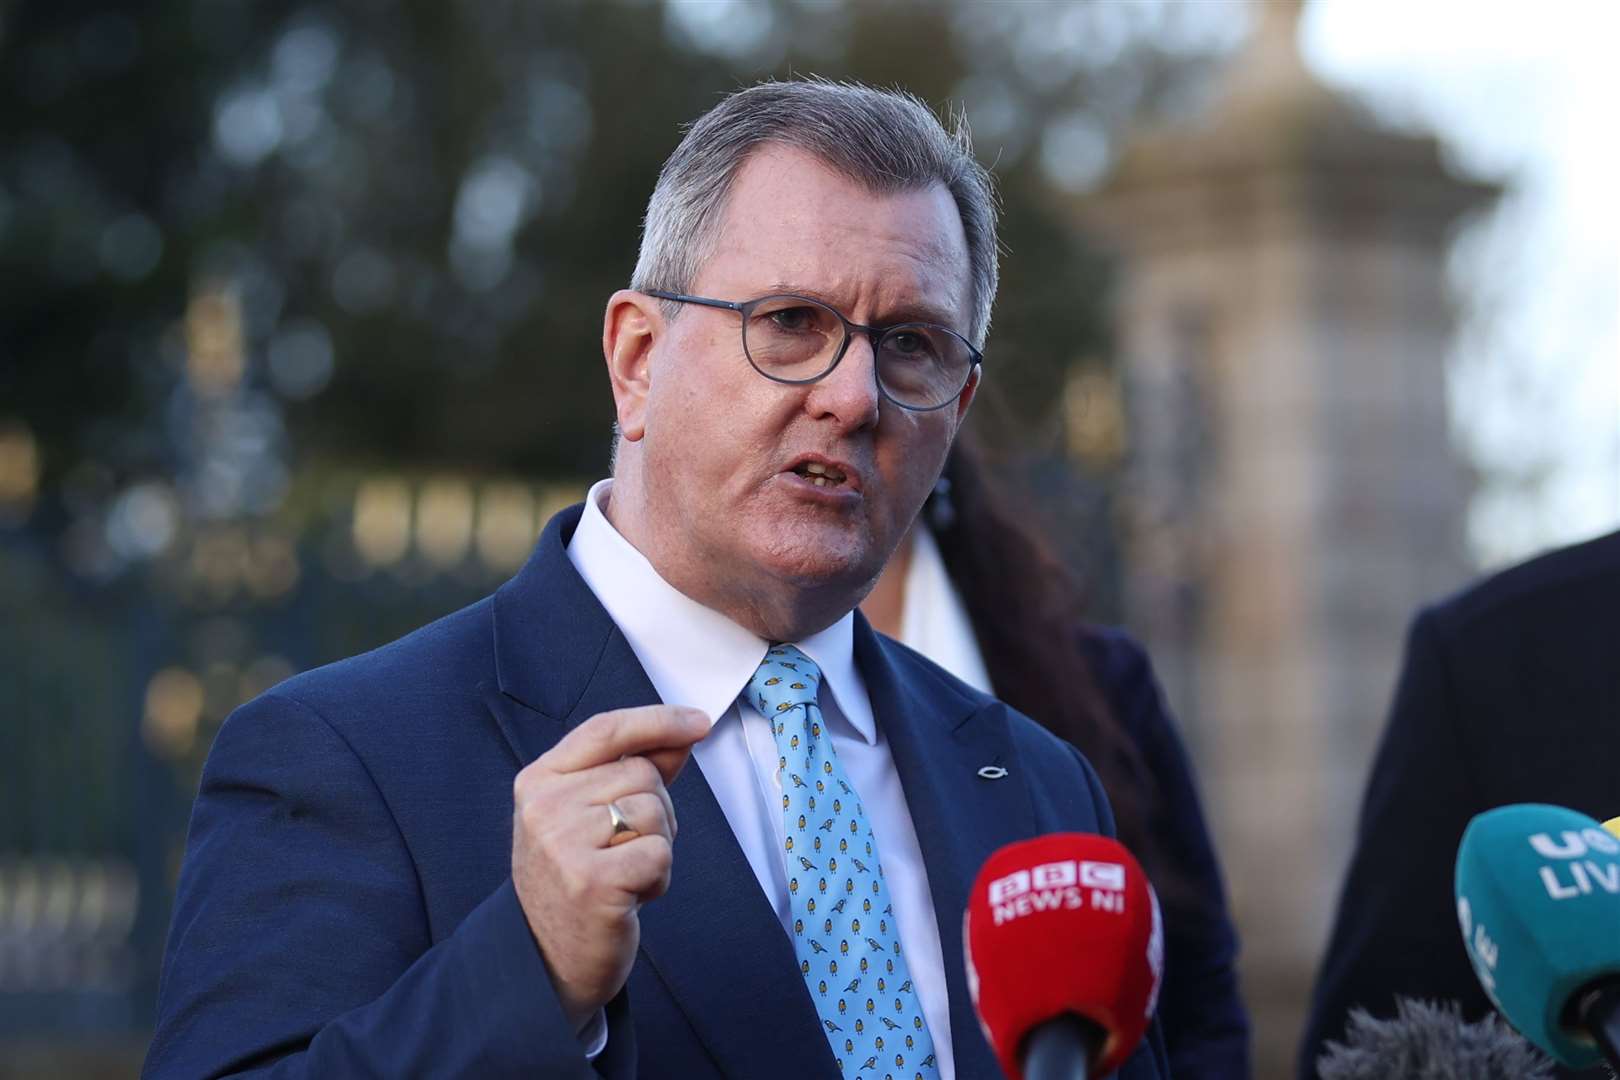 DUP leader Sir Jeffrey Donaldson accused the Irish government of ‘double standards’ (Liam McBurney/PA)